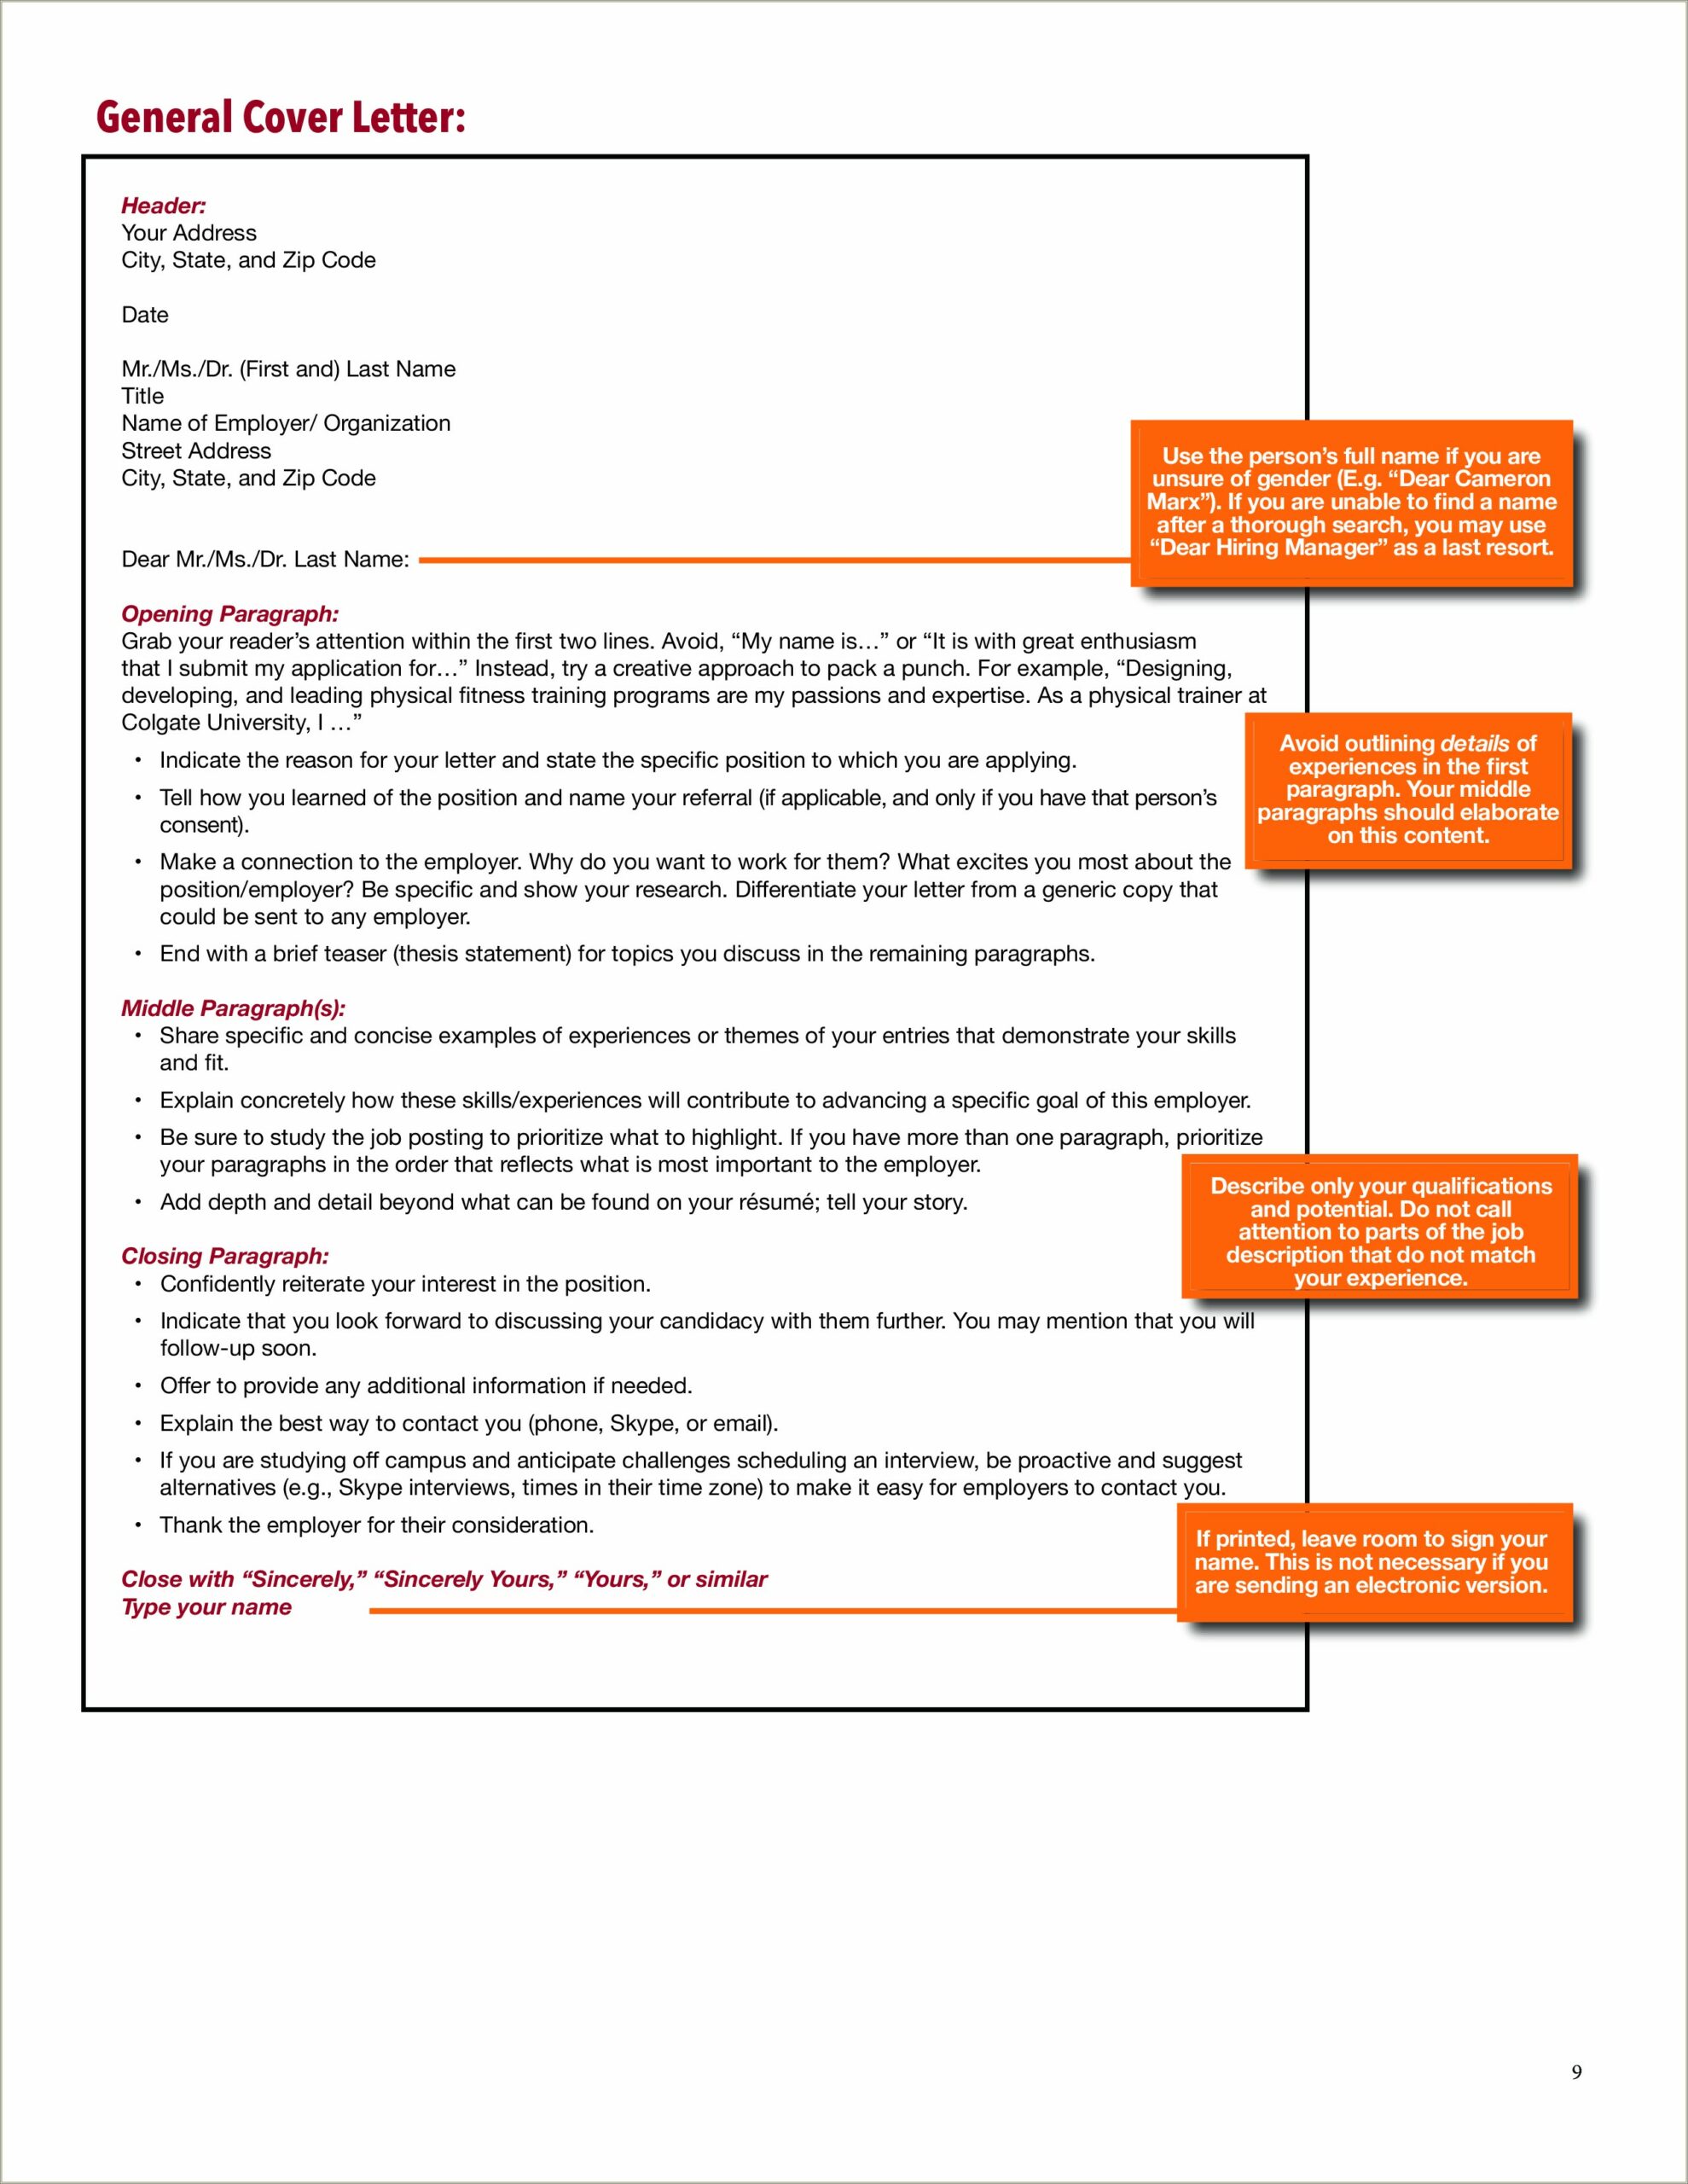 Resume And Cover Letter As A Single Document